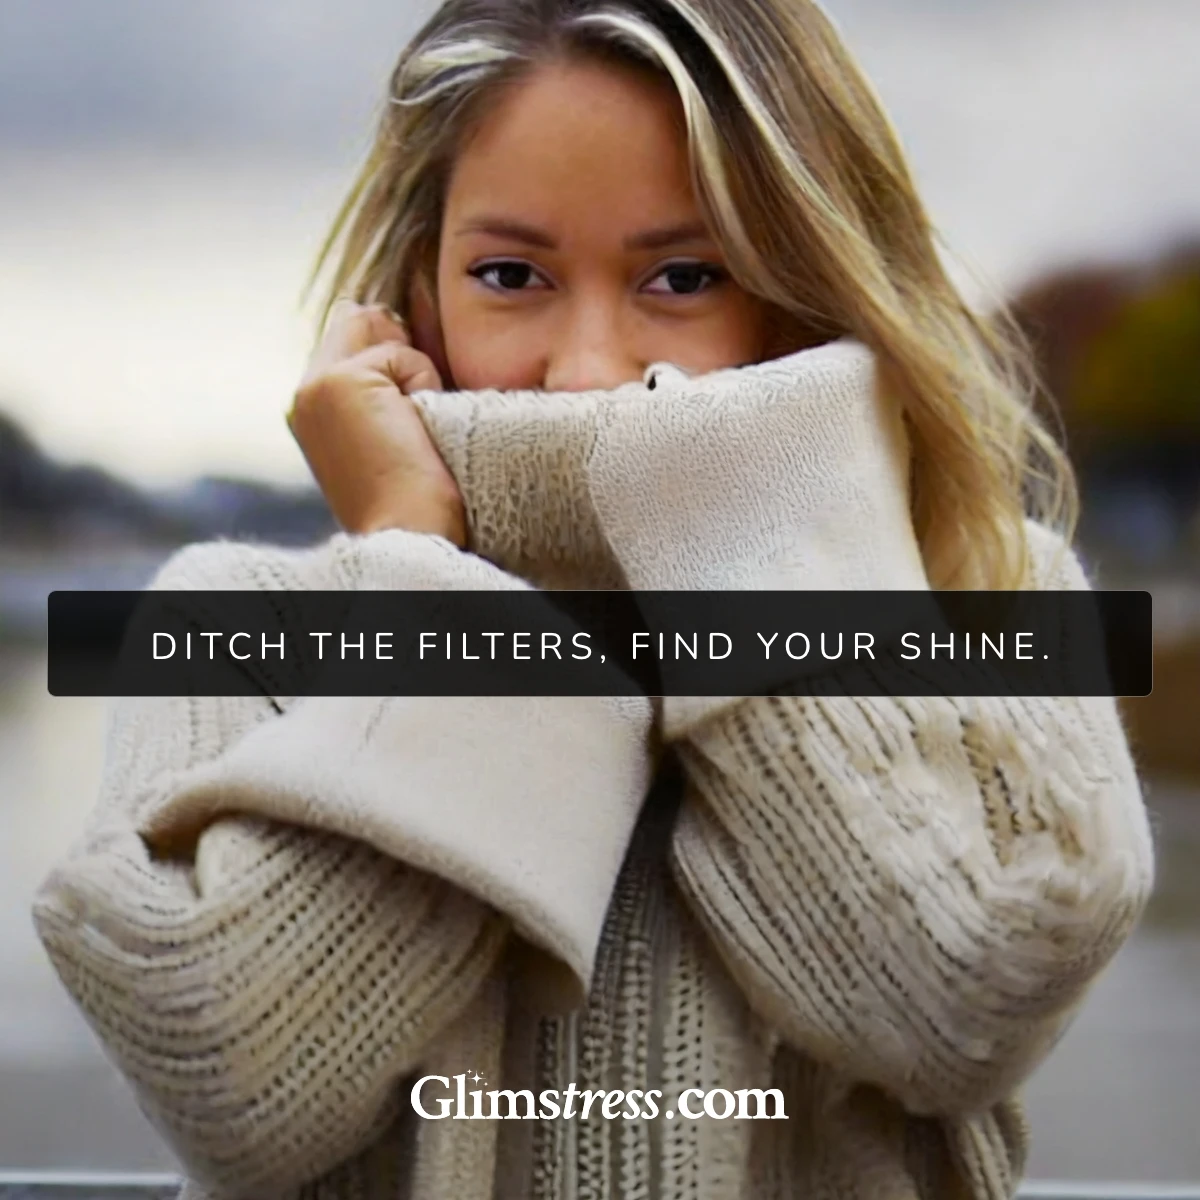 Ditch the filters, find your shine: 10 science-backed ways to show up in the world as pretty as you are.